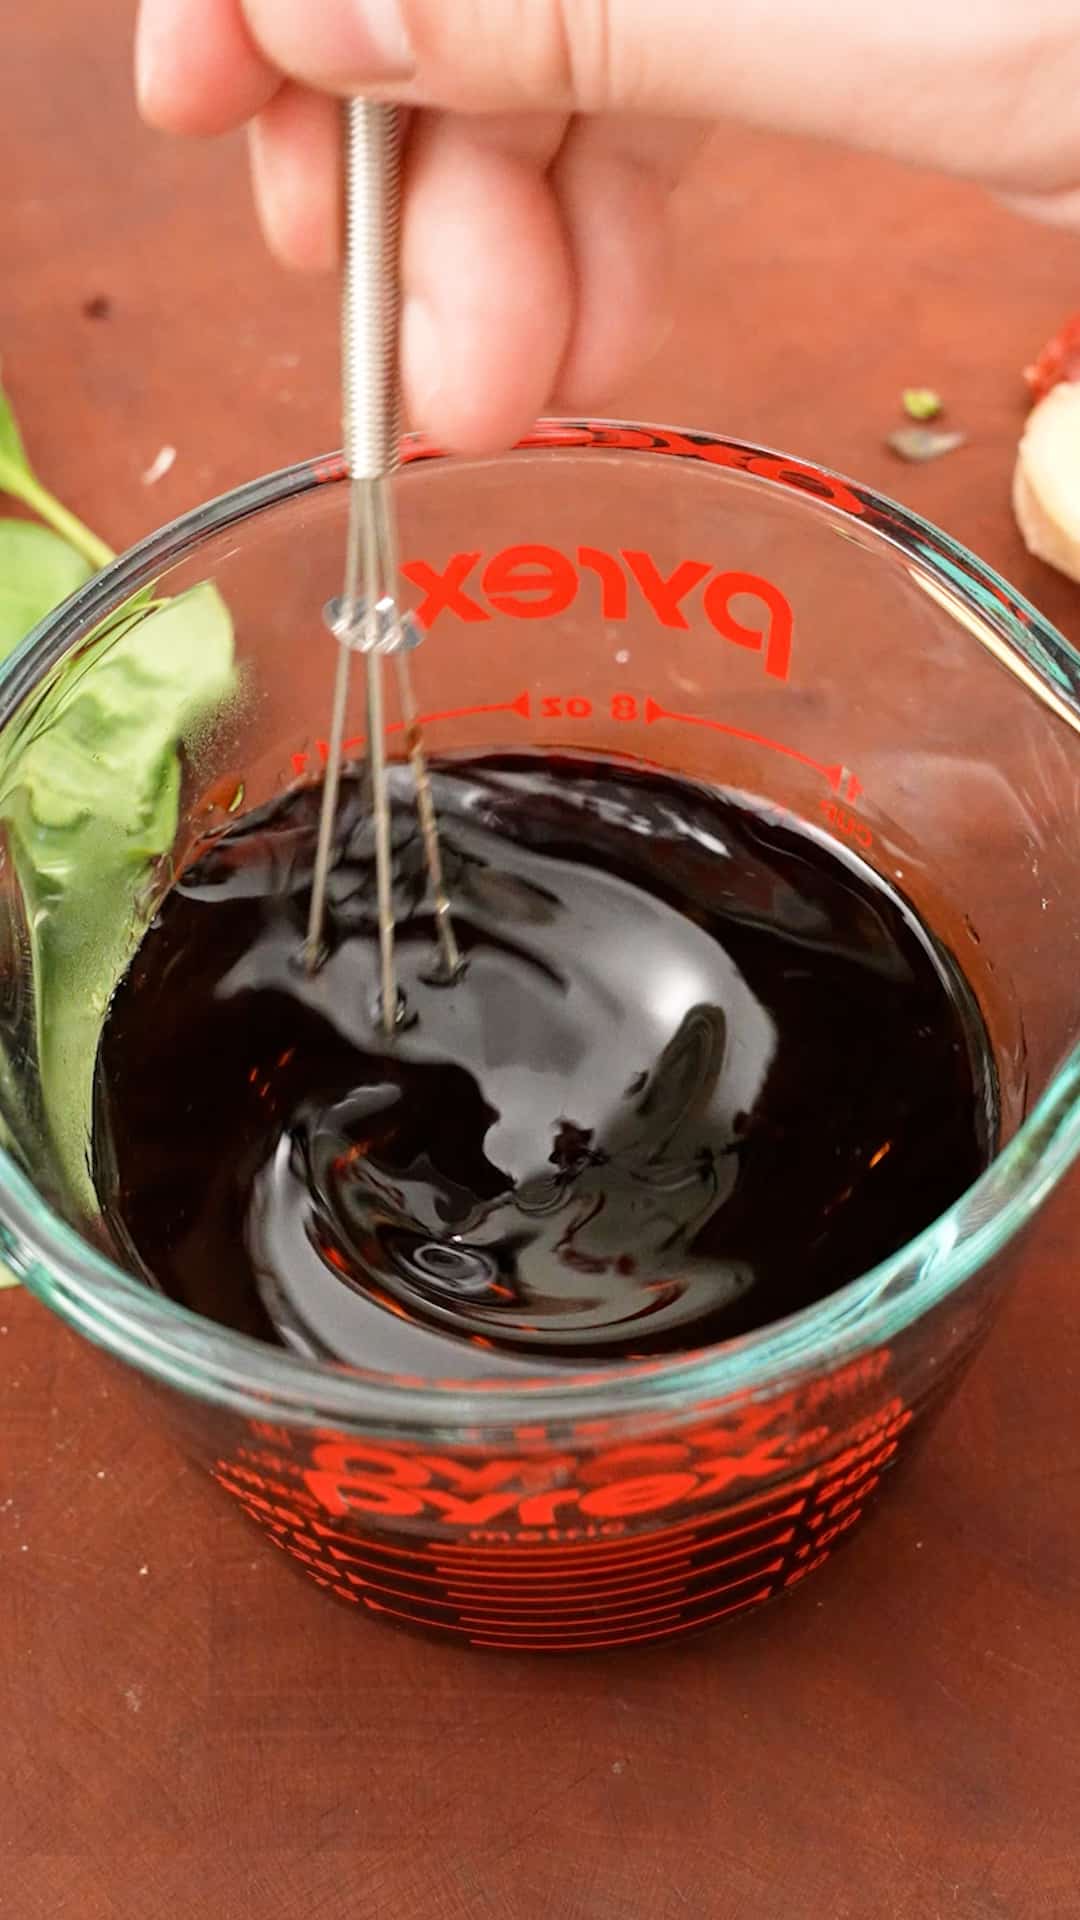 Mixing sauce in a measuring cup for Three Cup Chicken.